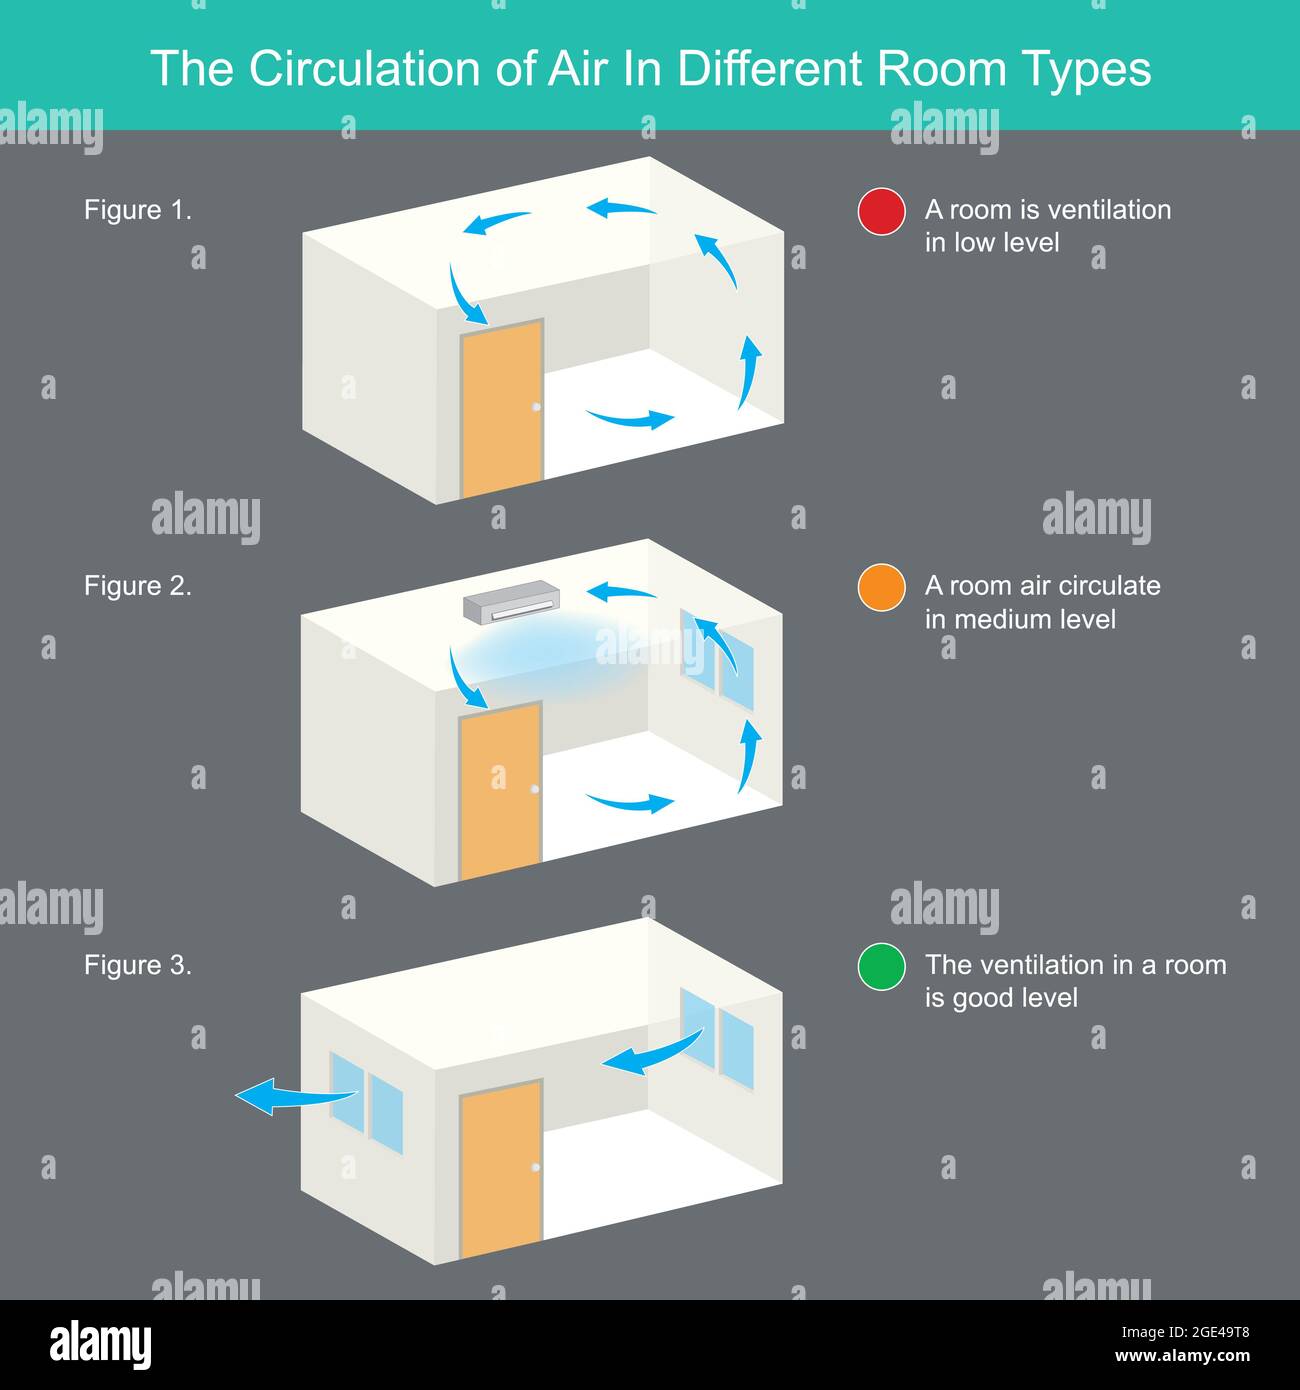 The circulation of air in different room types. Illustration explain the circulate of air in different room types Stock Photo